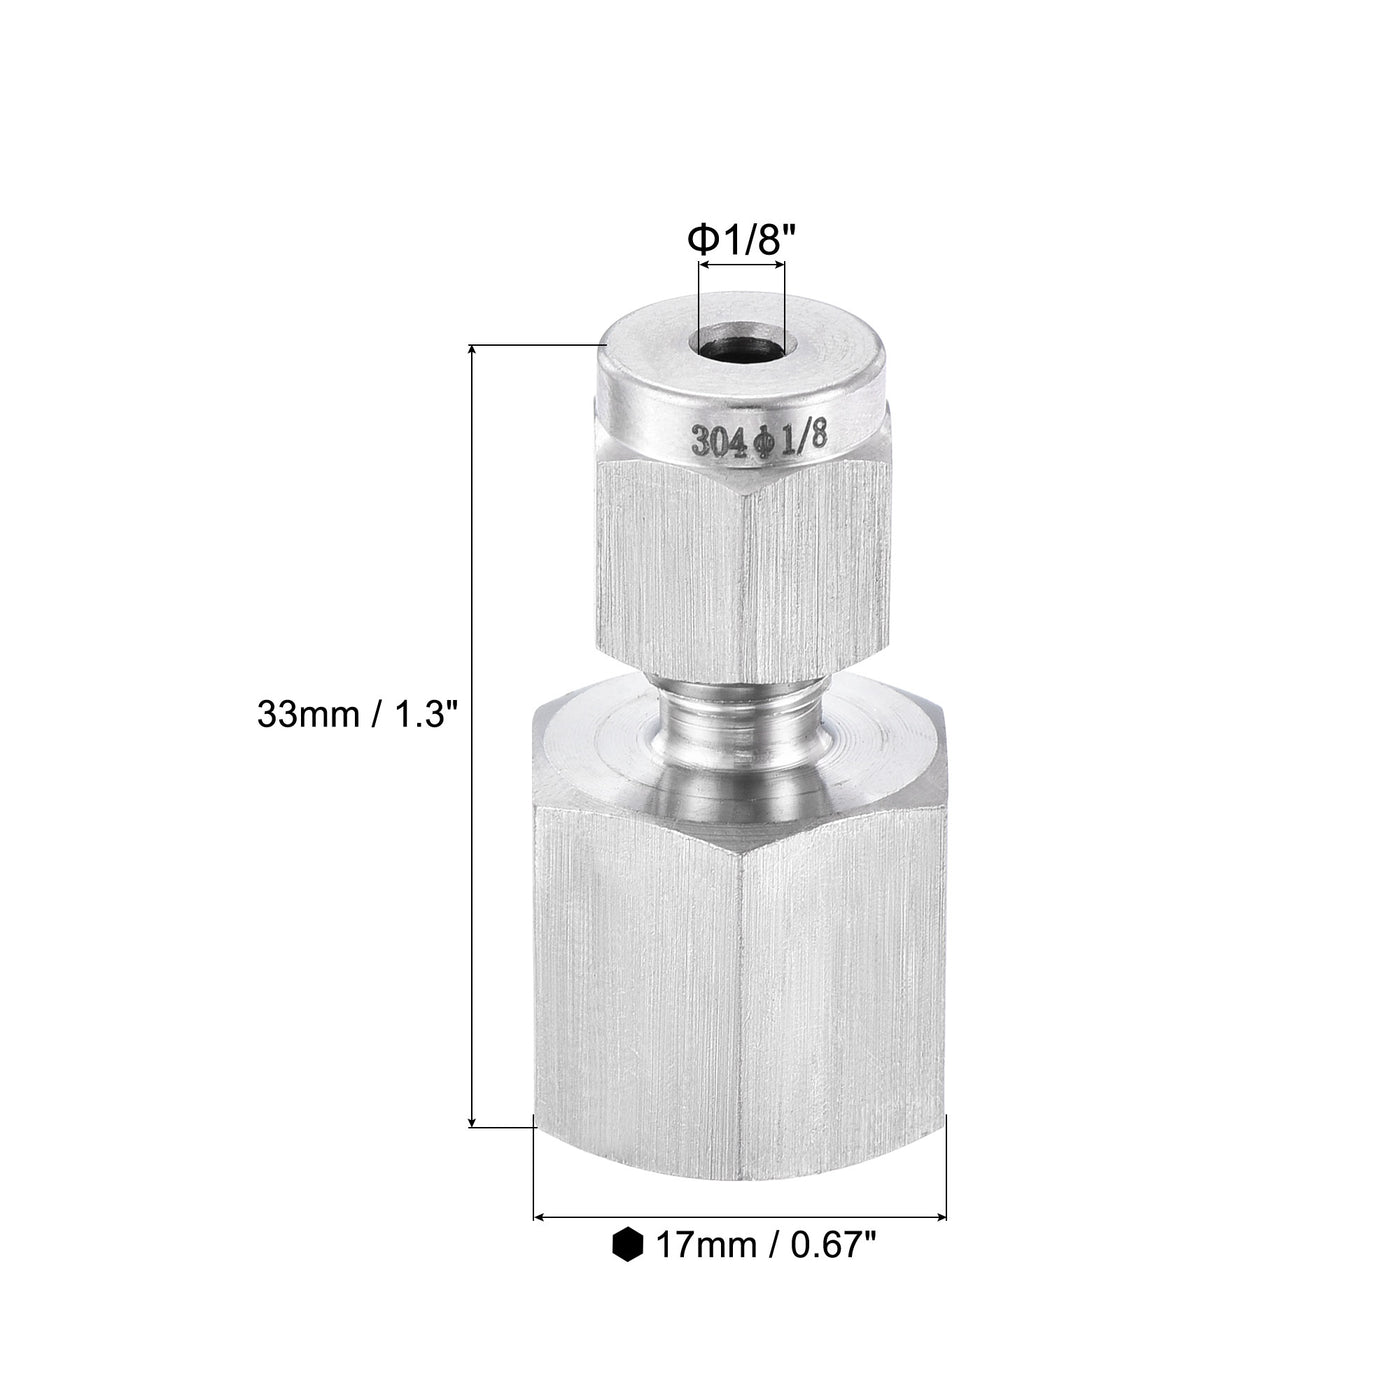 Uxcell Uxcell Compression Tube Fitting 1/4NPT Female Thread x 3/8" Tube OD Straight Coupling Adapter 304 Stainless Steel